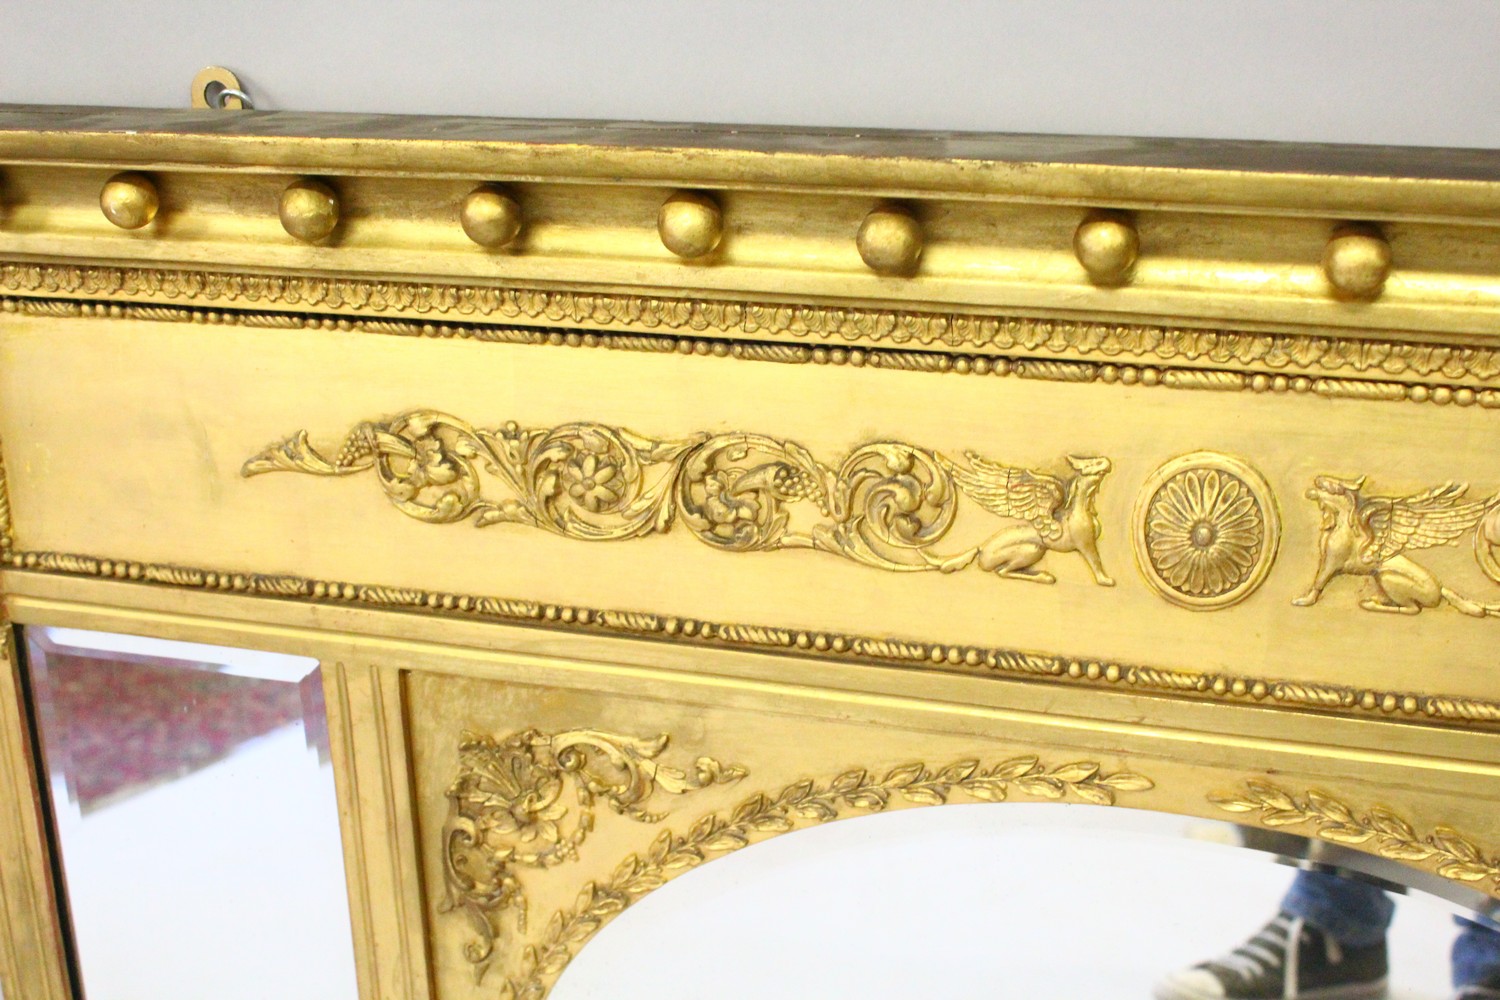 A VERY GOOD GILTWOOD OVERMANTLE MIRROR with oval mirrored panels and rectangular mirror in an ornate - Image 4 of 6